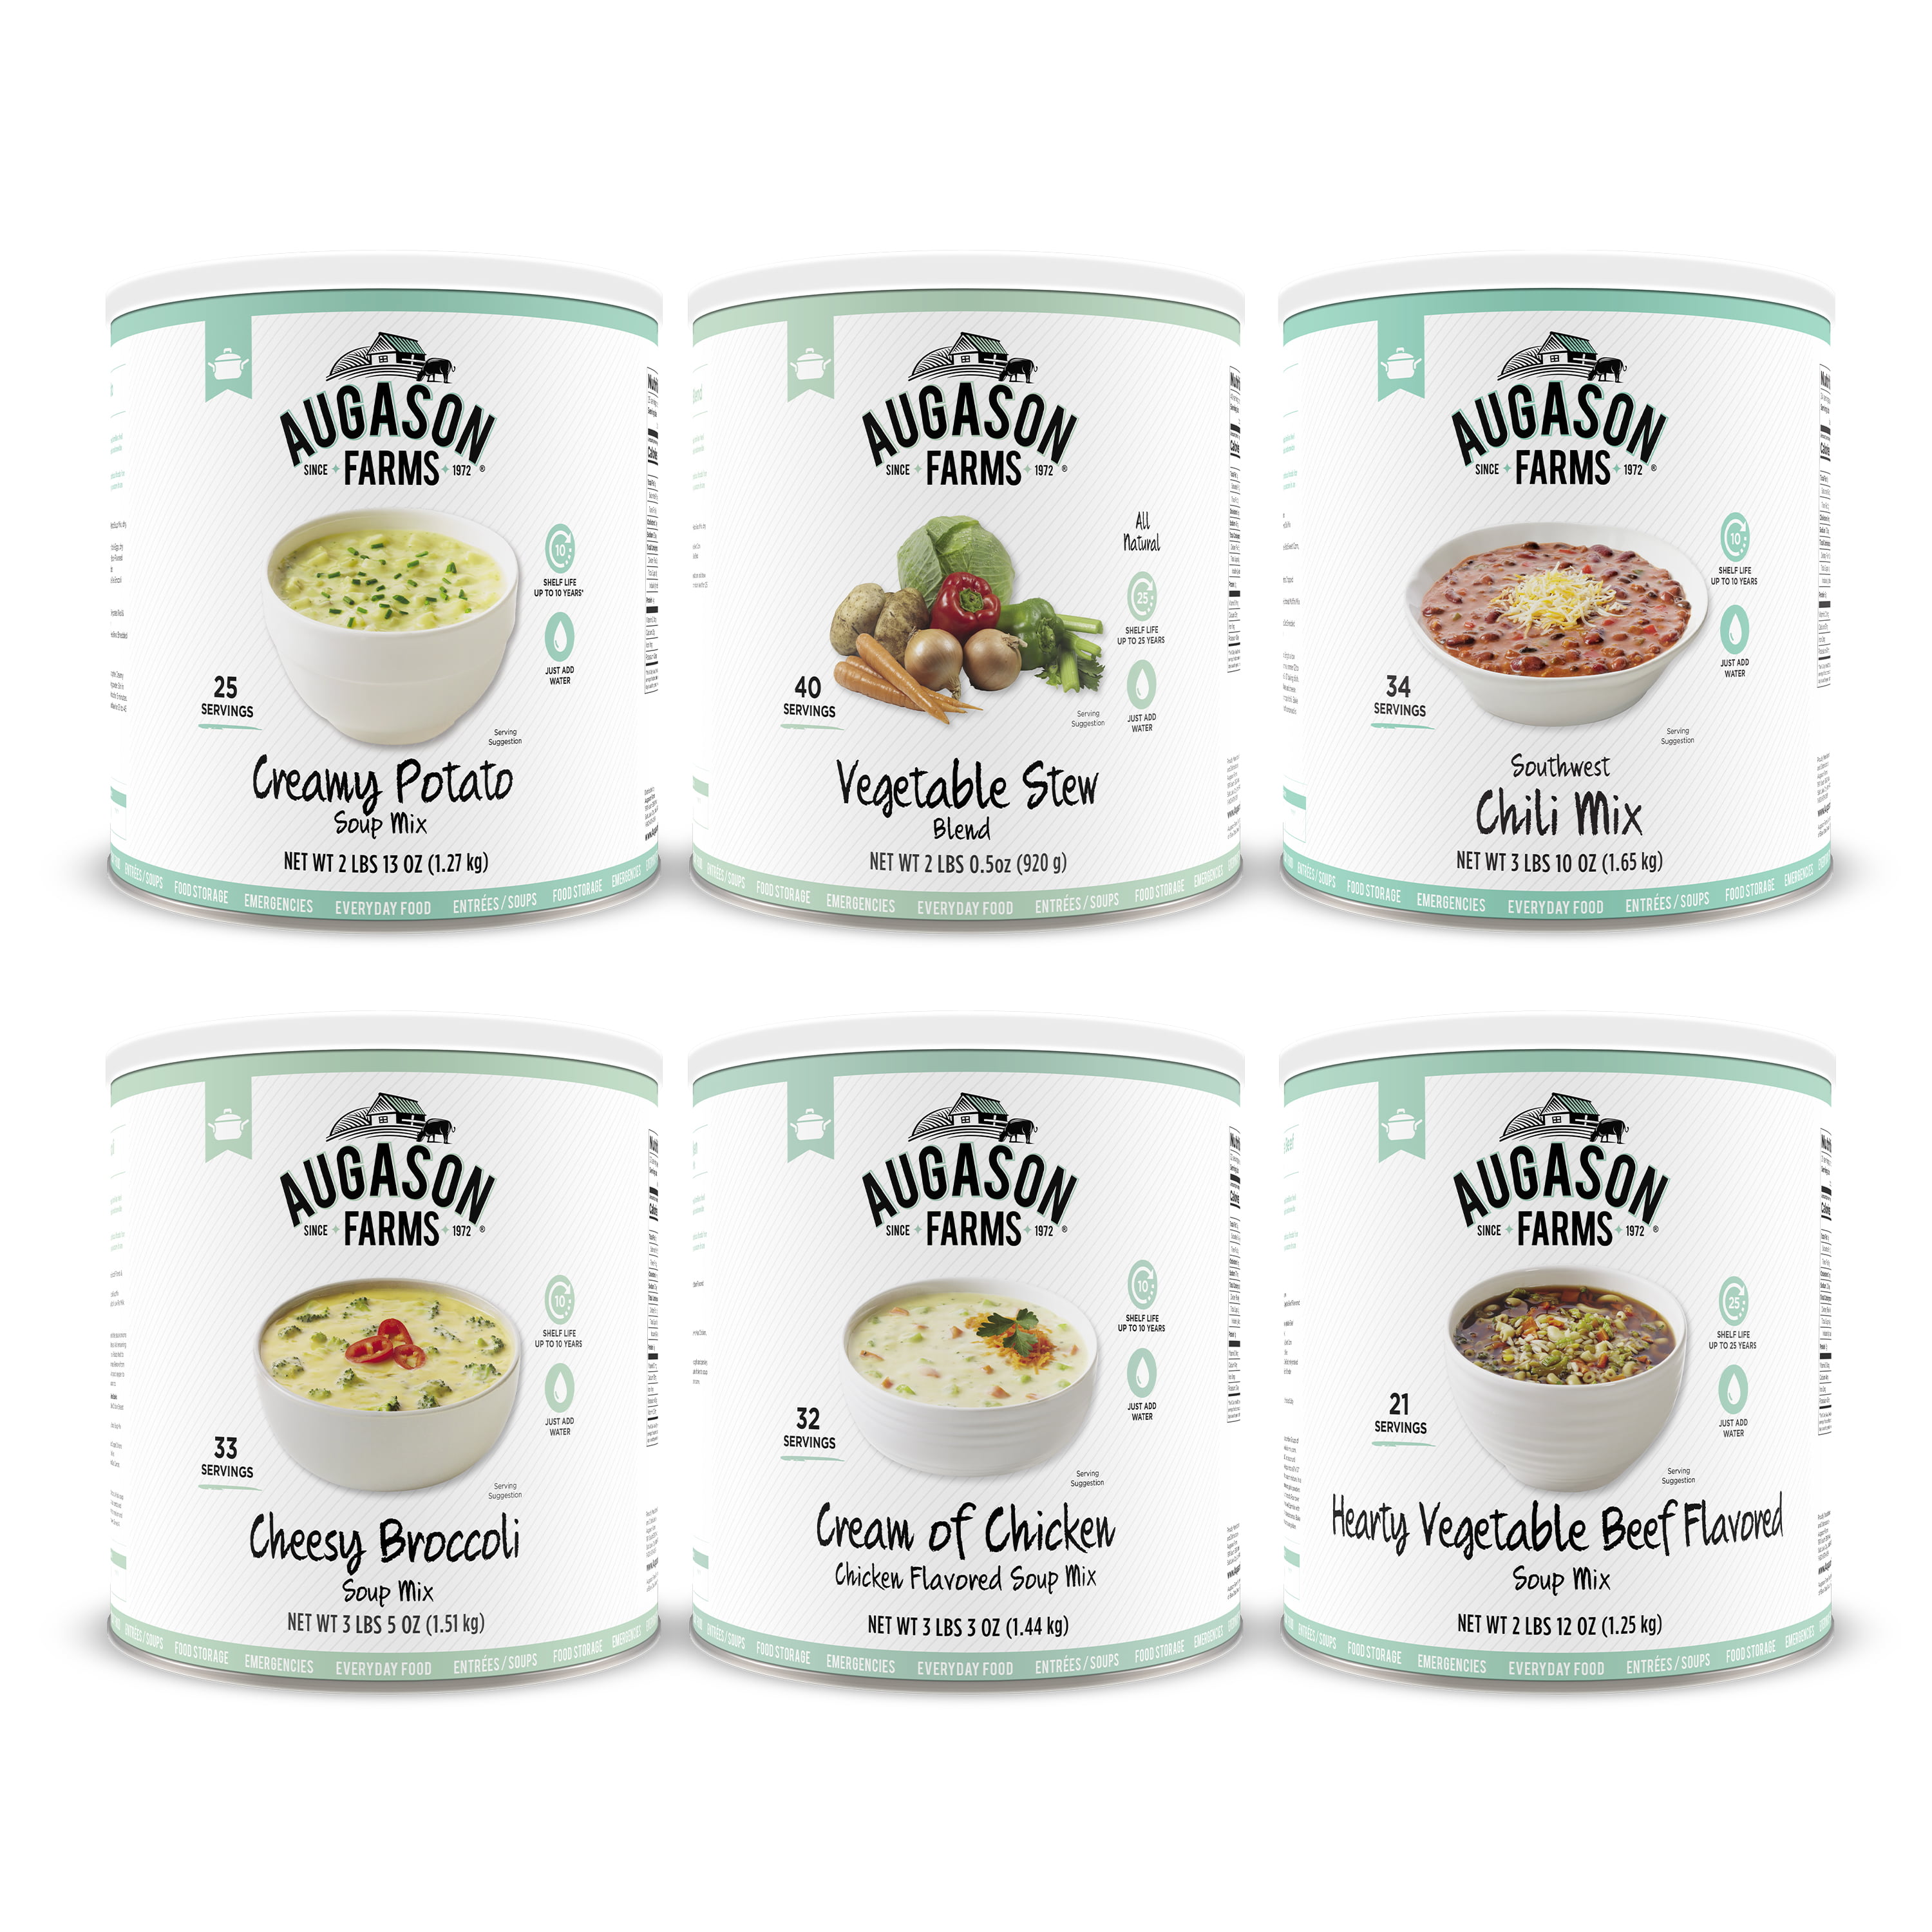 Kitchen & Love Best Sellers Variety Box 6-Pack | Vegan, Ready-to-Eat, No  Refrigeration Required | Plant-Based, Gourmet Flavors